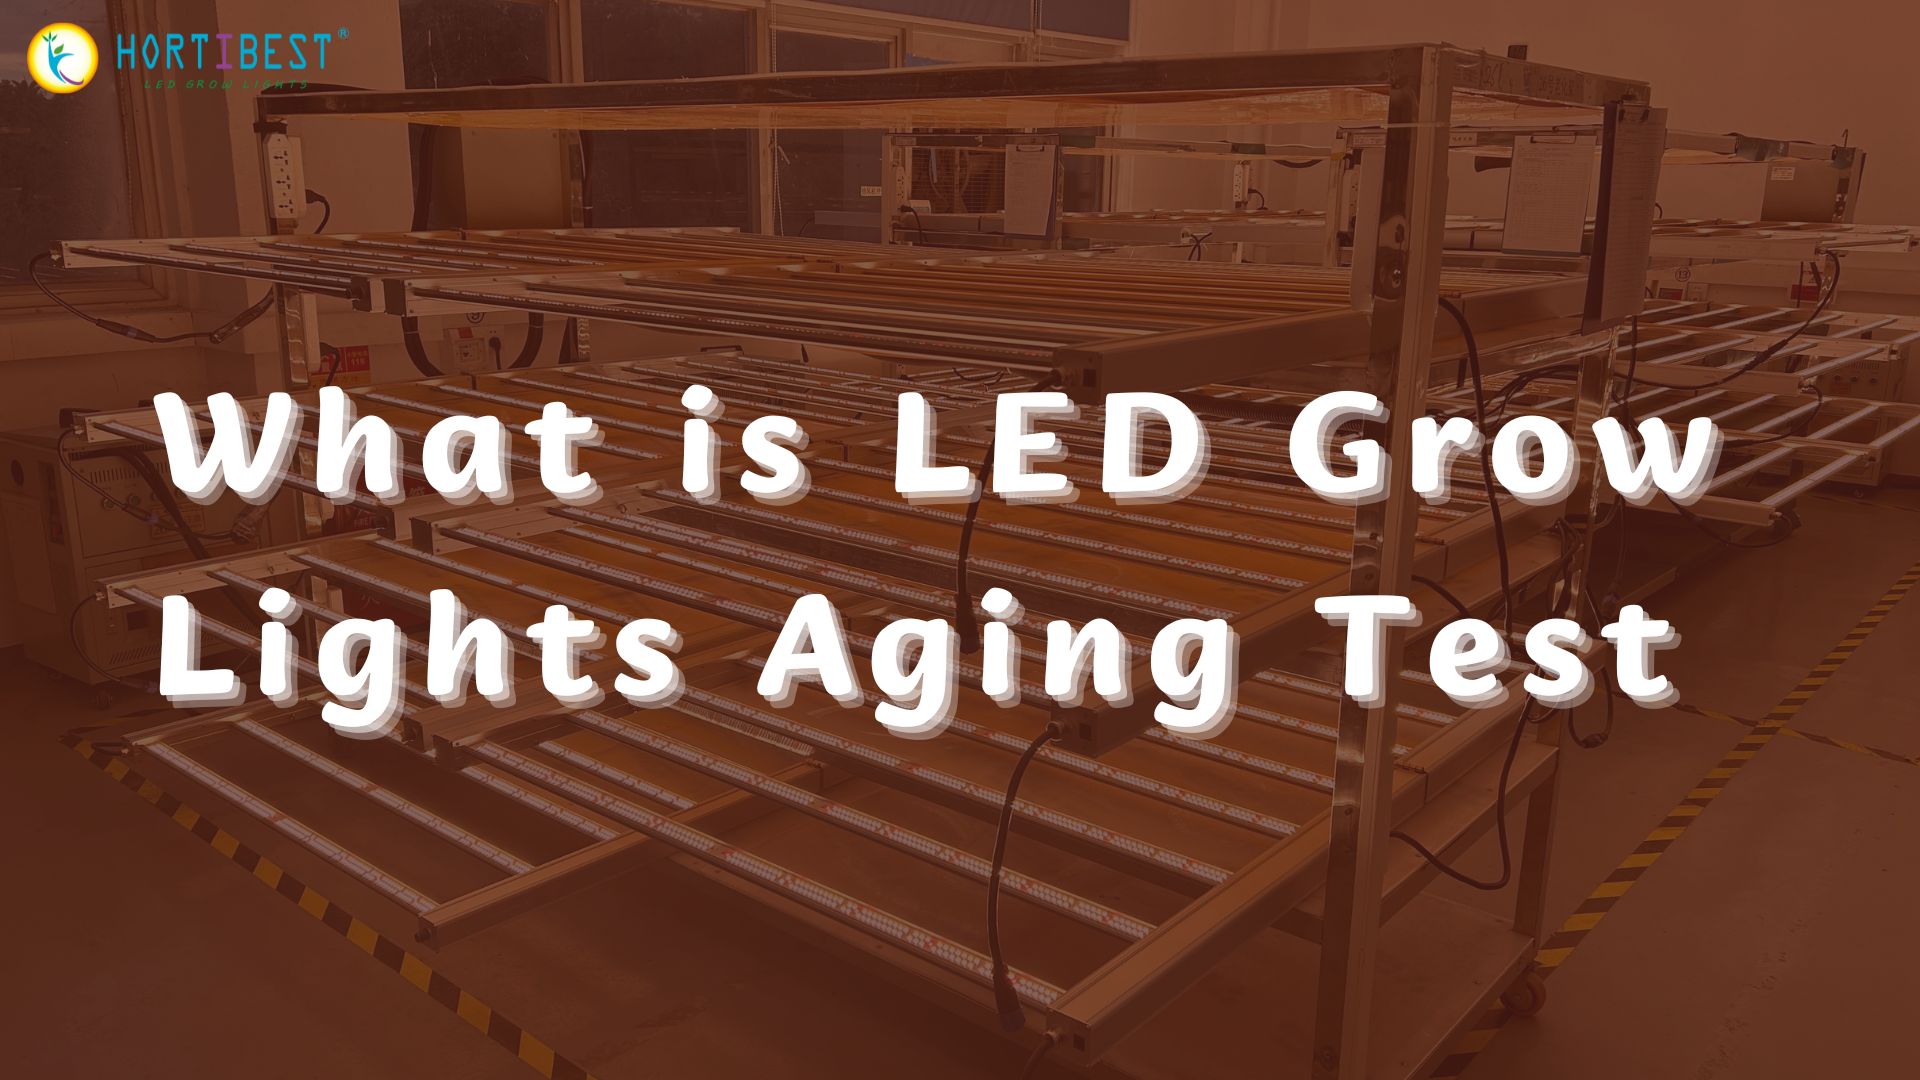 What is LED Grow Lights Aging Test?